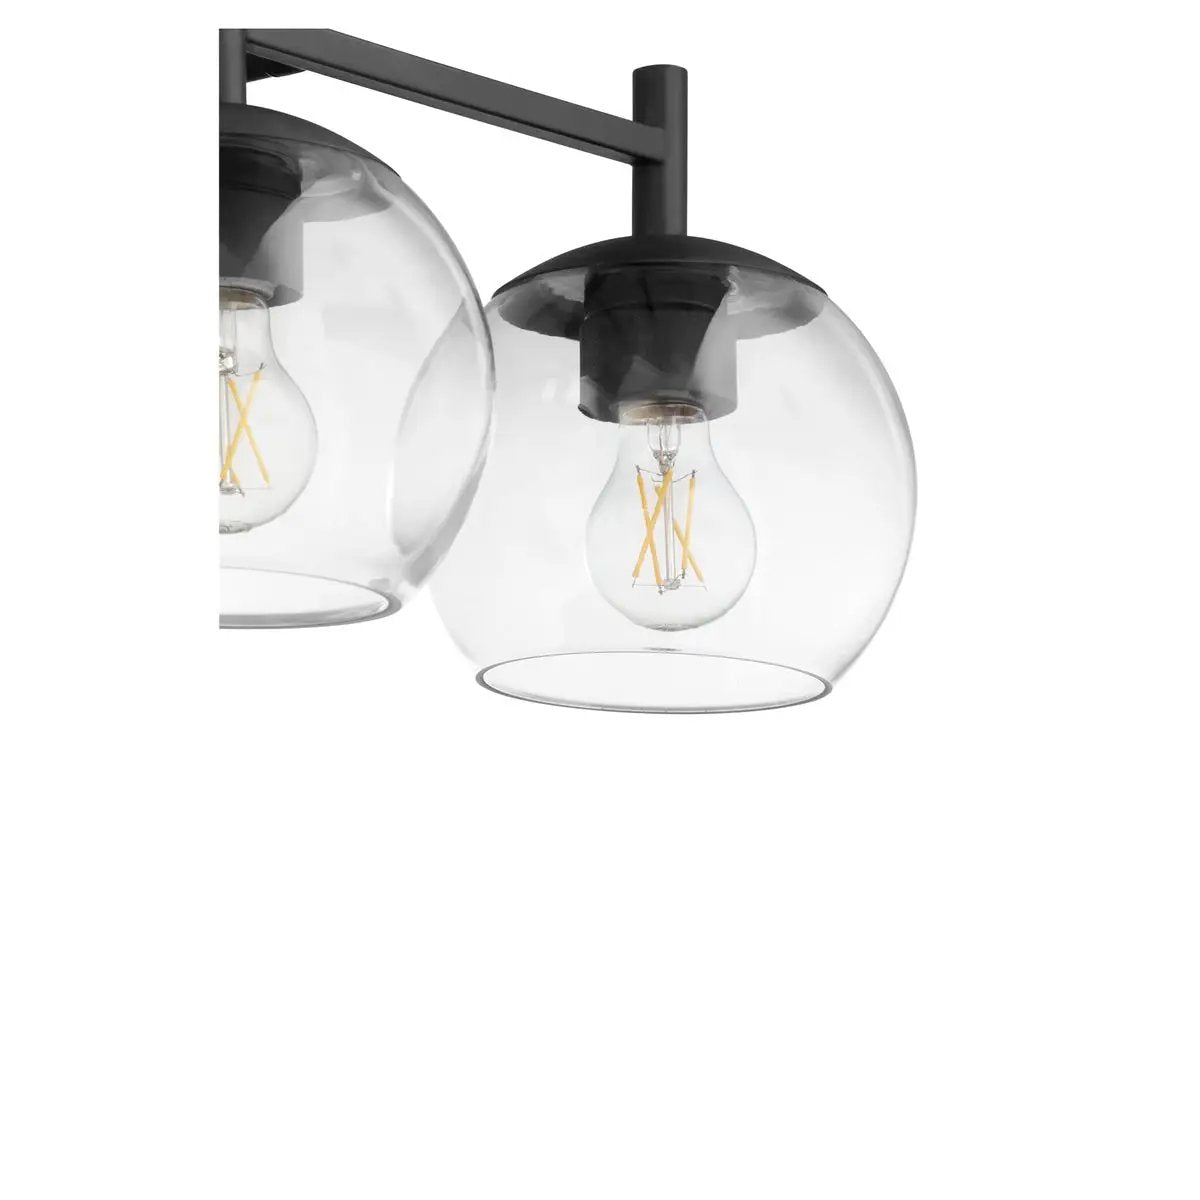 A mid century modern vanity light with clear glass globes, offering subtle sophistication with bold, clean lines. Perfect for residential and commercial interiors.